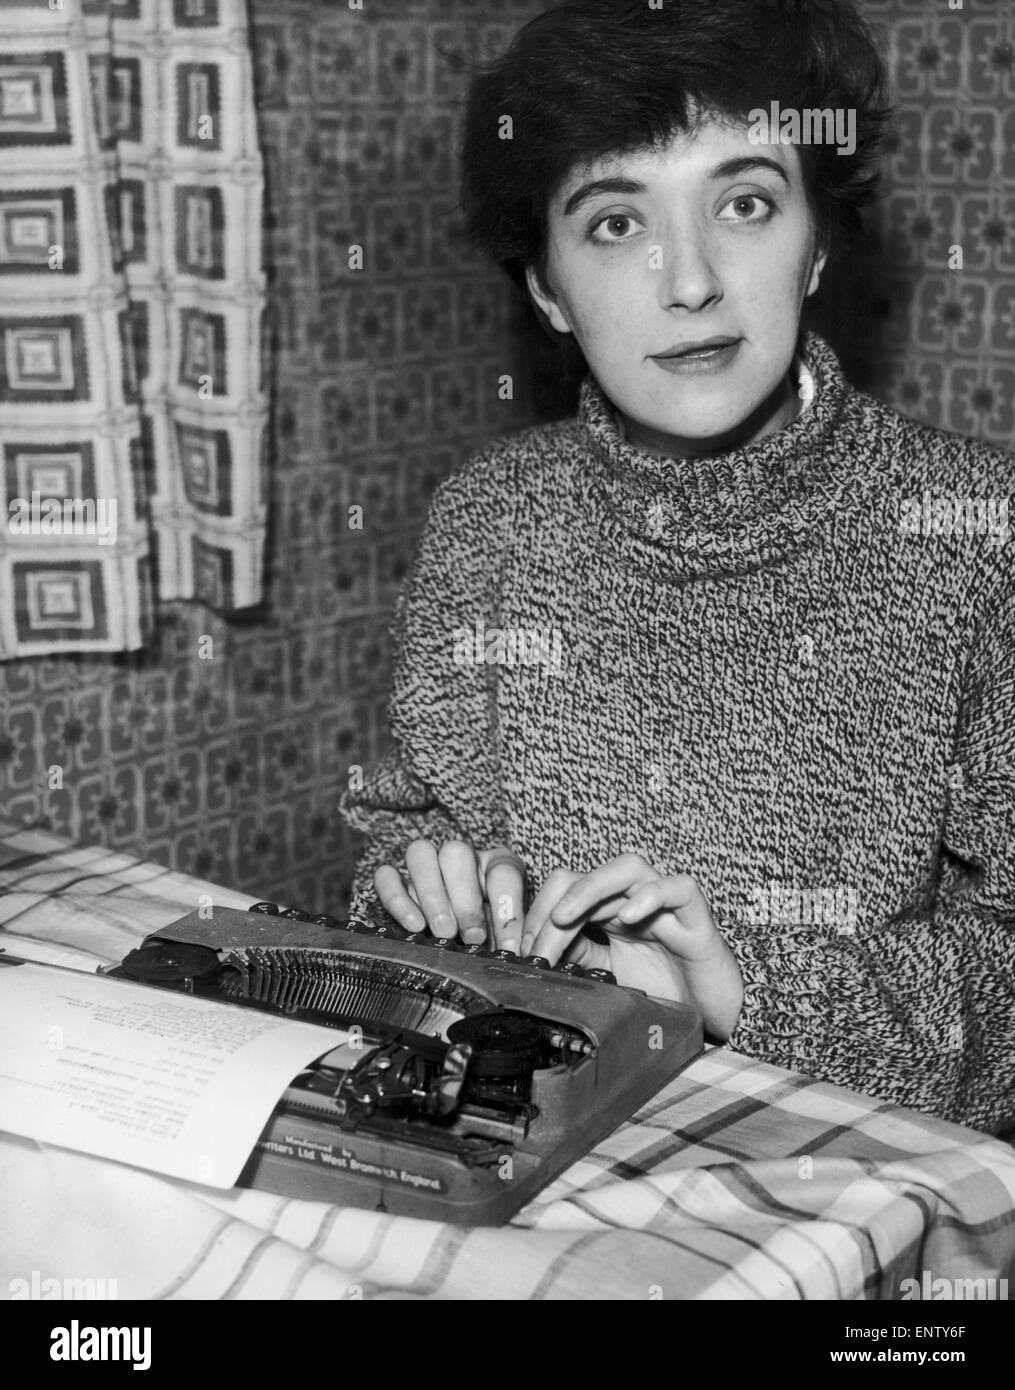 Salford born playwright Shelagh Delaney pictured at work on her typewriter at her home in Duchy Road, Salford ahead of the premiere of her play 'A Taste of Honey' which is to open at a West End theatre in February. 1st January 1959. Stock Photo